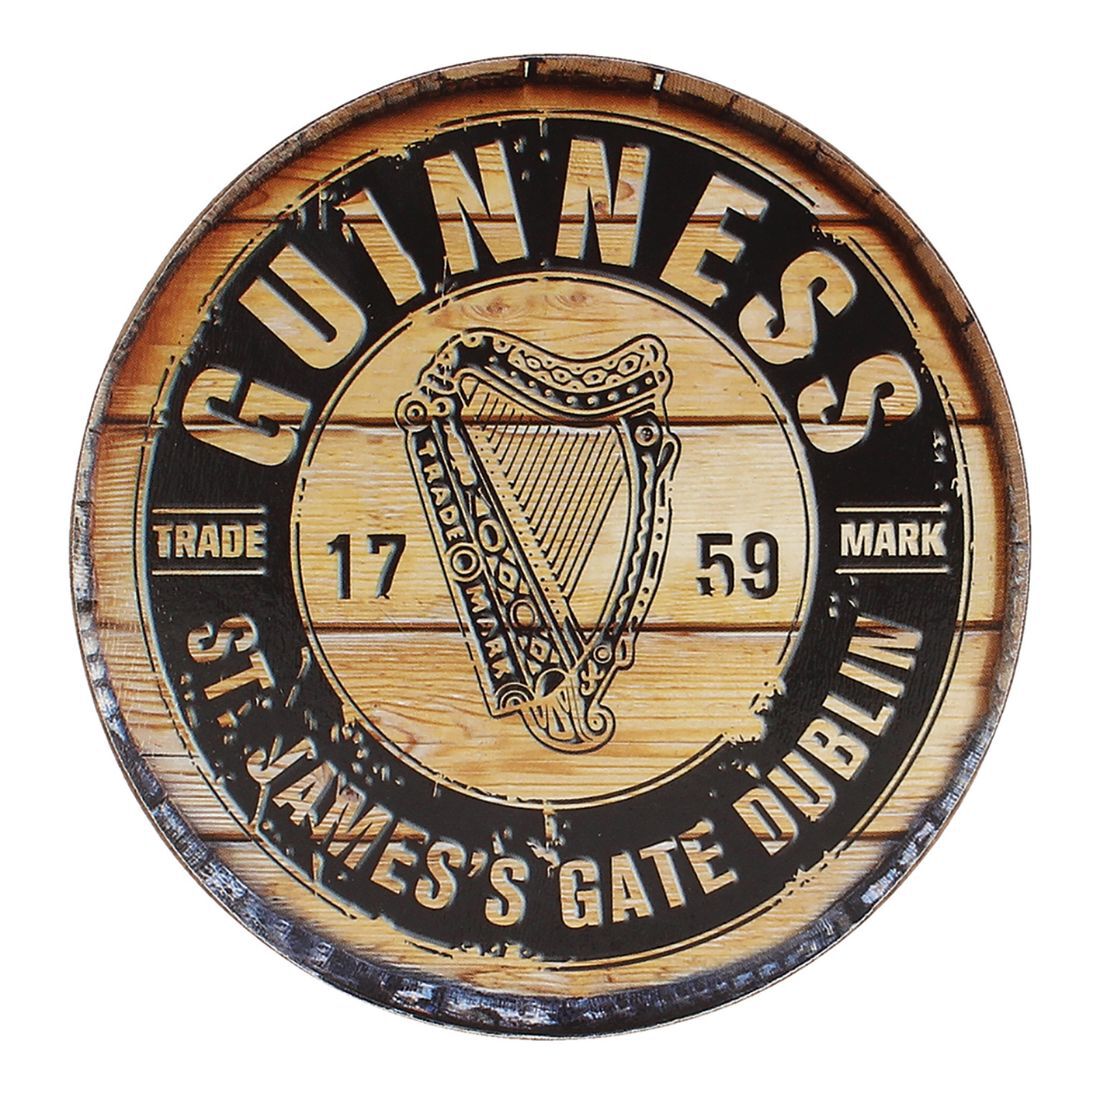 James's Gate Harp Design, 4 Pack Guinness Cork Coasters With 1759 St